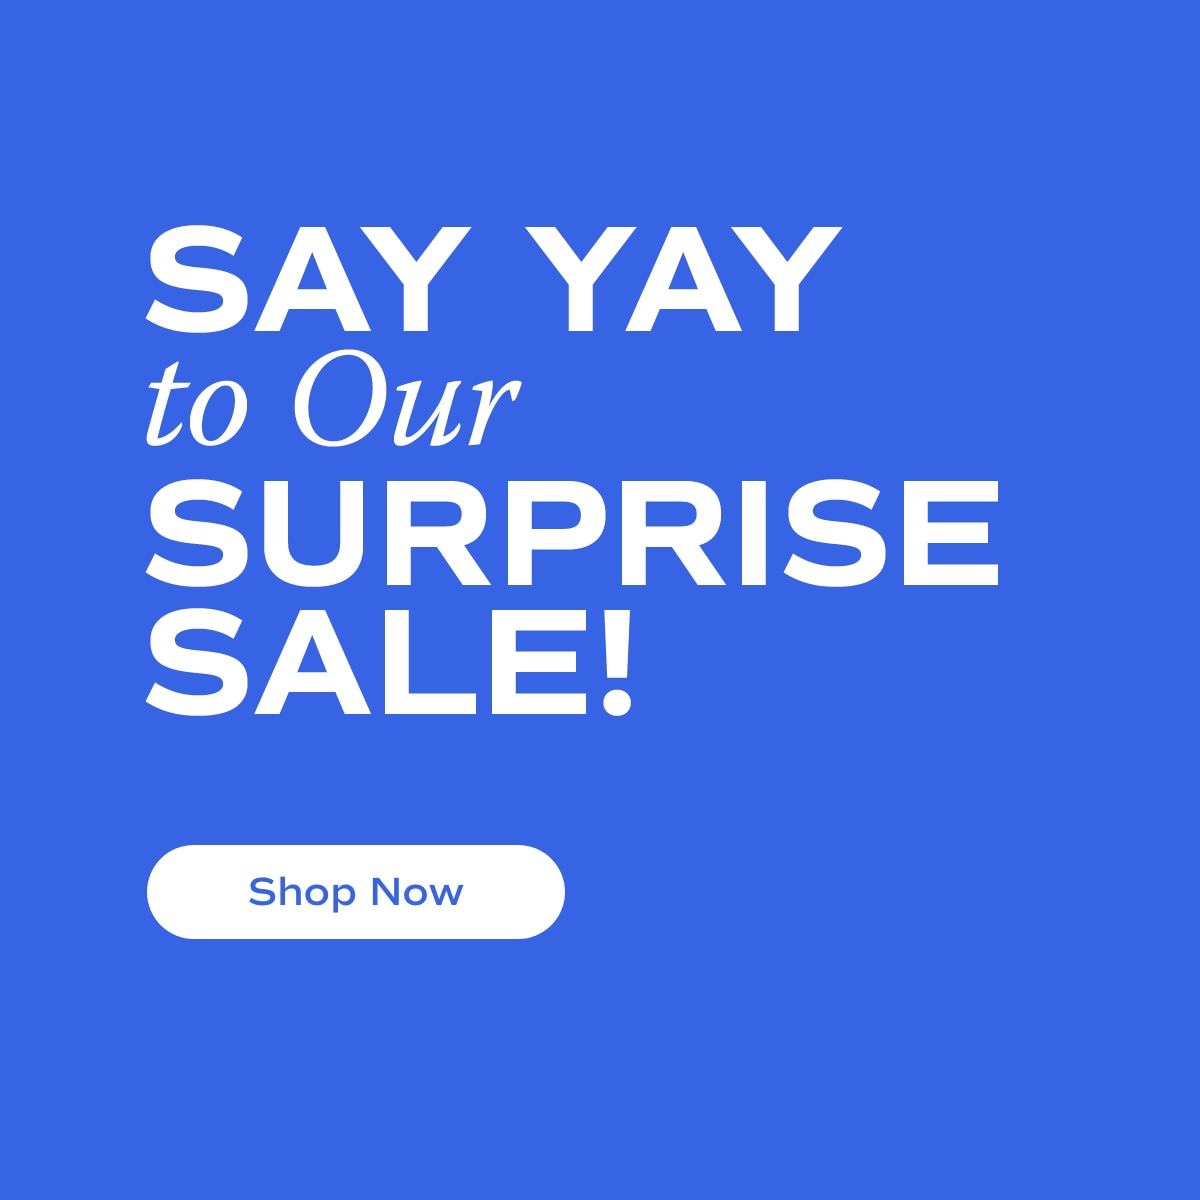 SAY YAY to Our SURPRISE SALE! | Shop Now